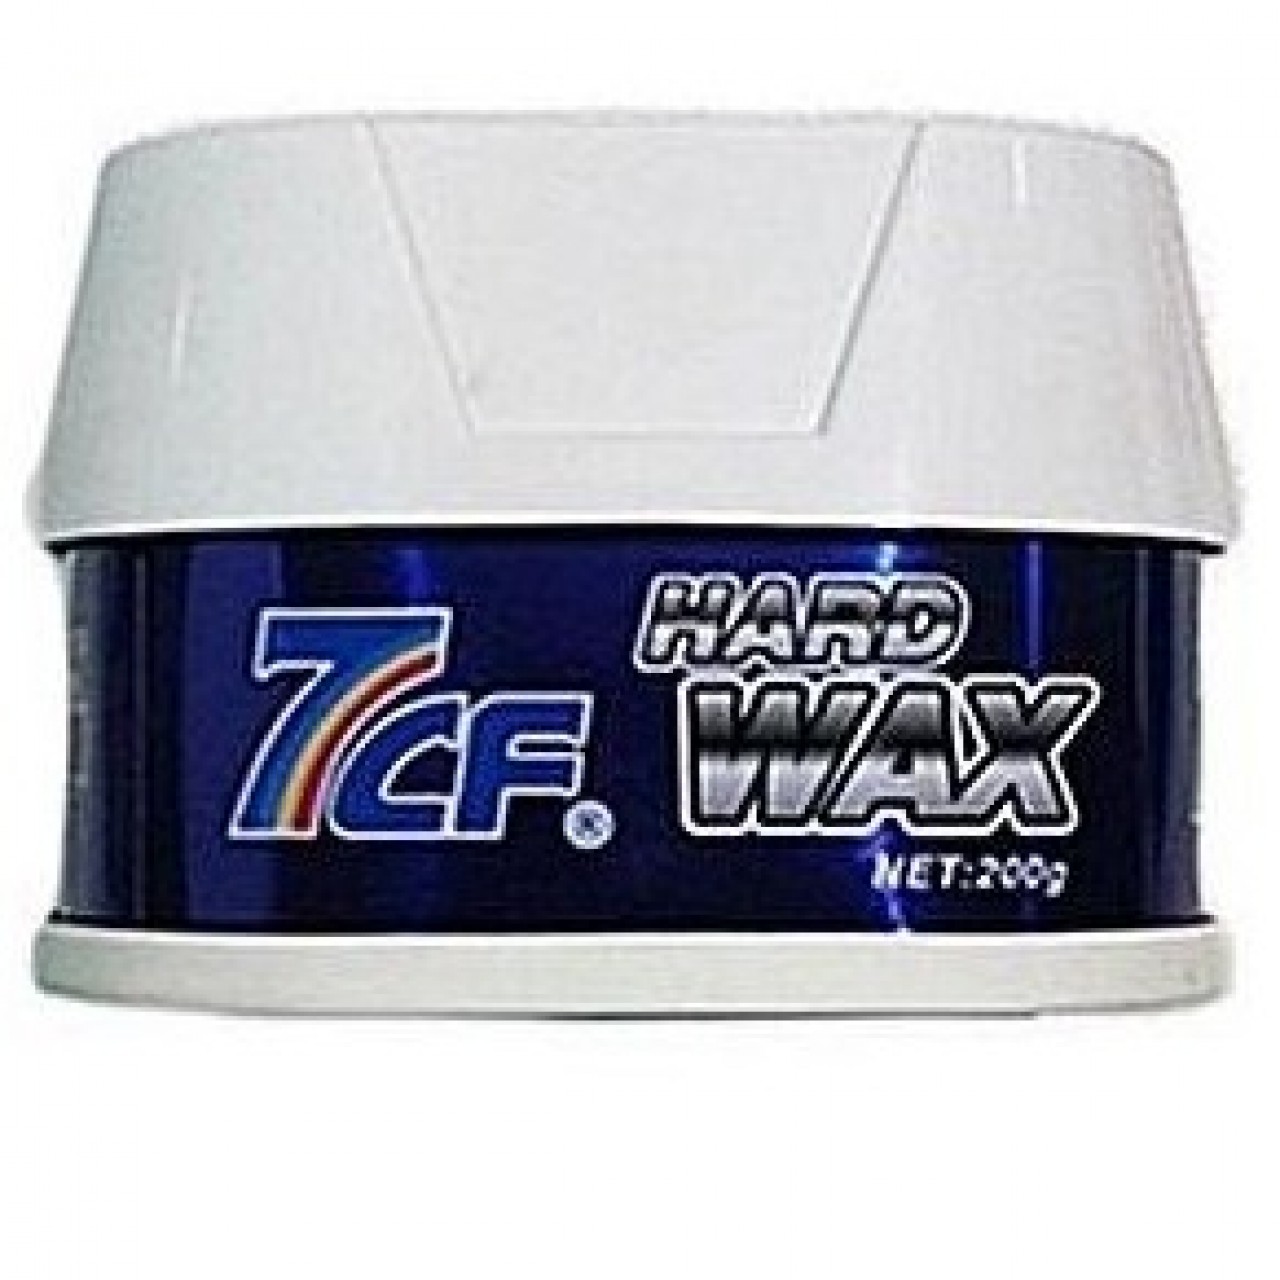 High Quality 7cF Hard Wax For Cars & Other Automobiles - 200g